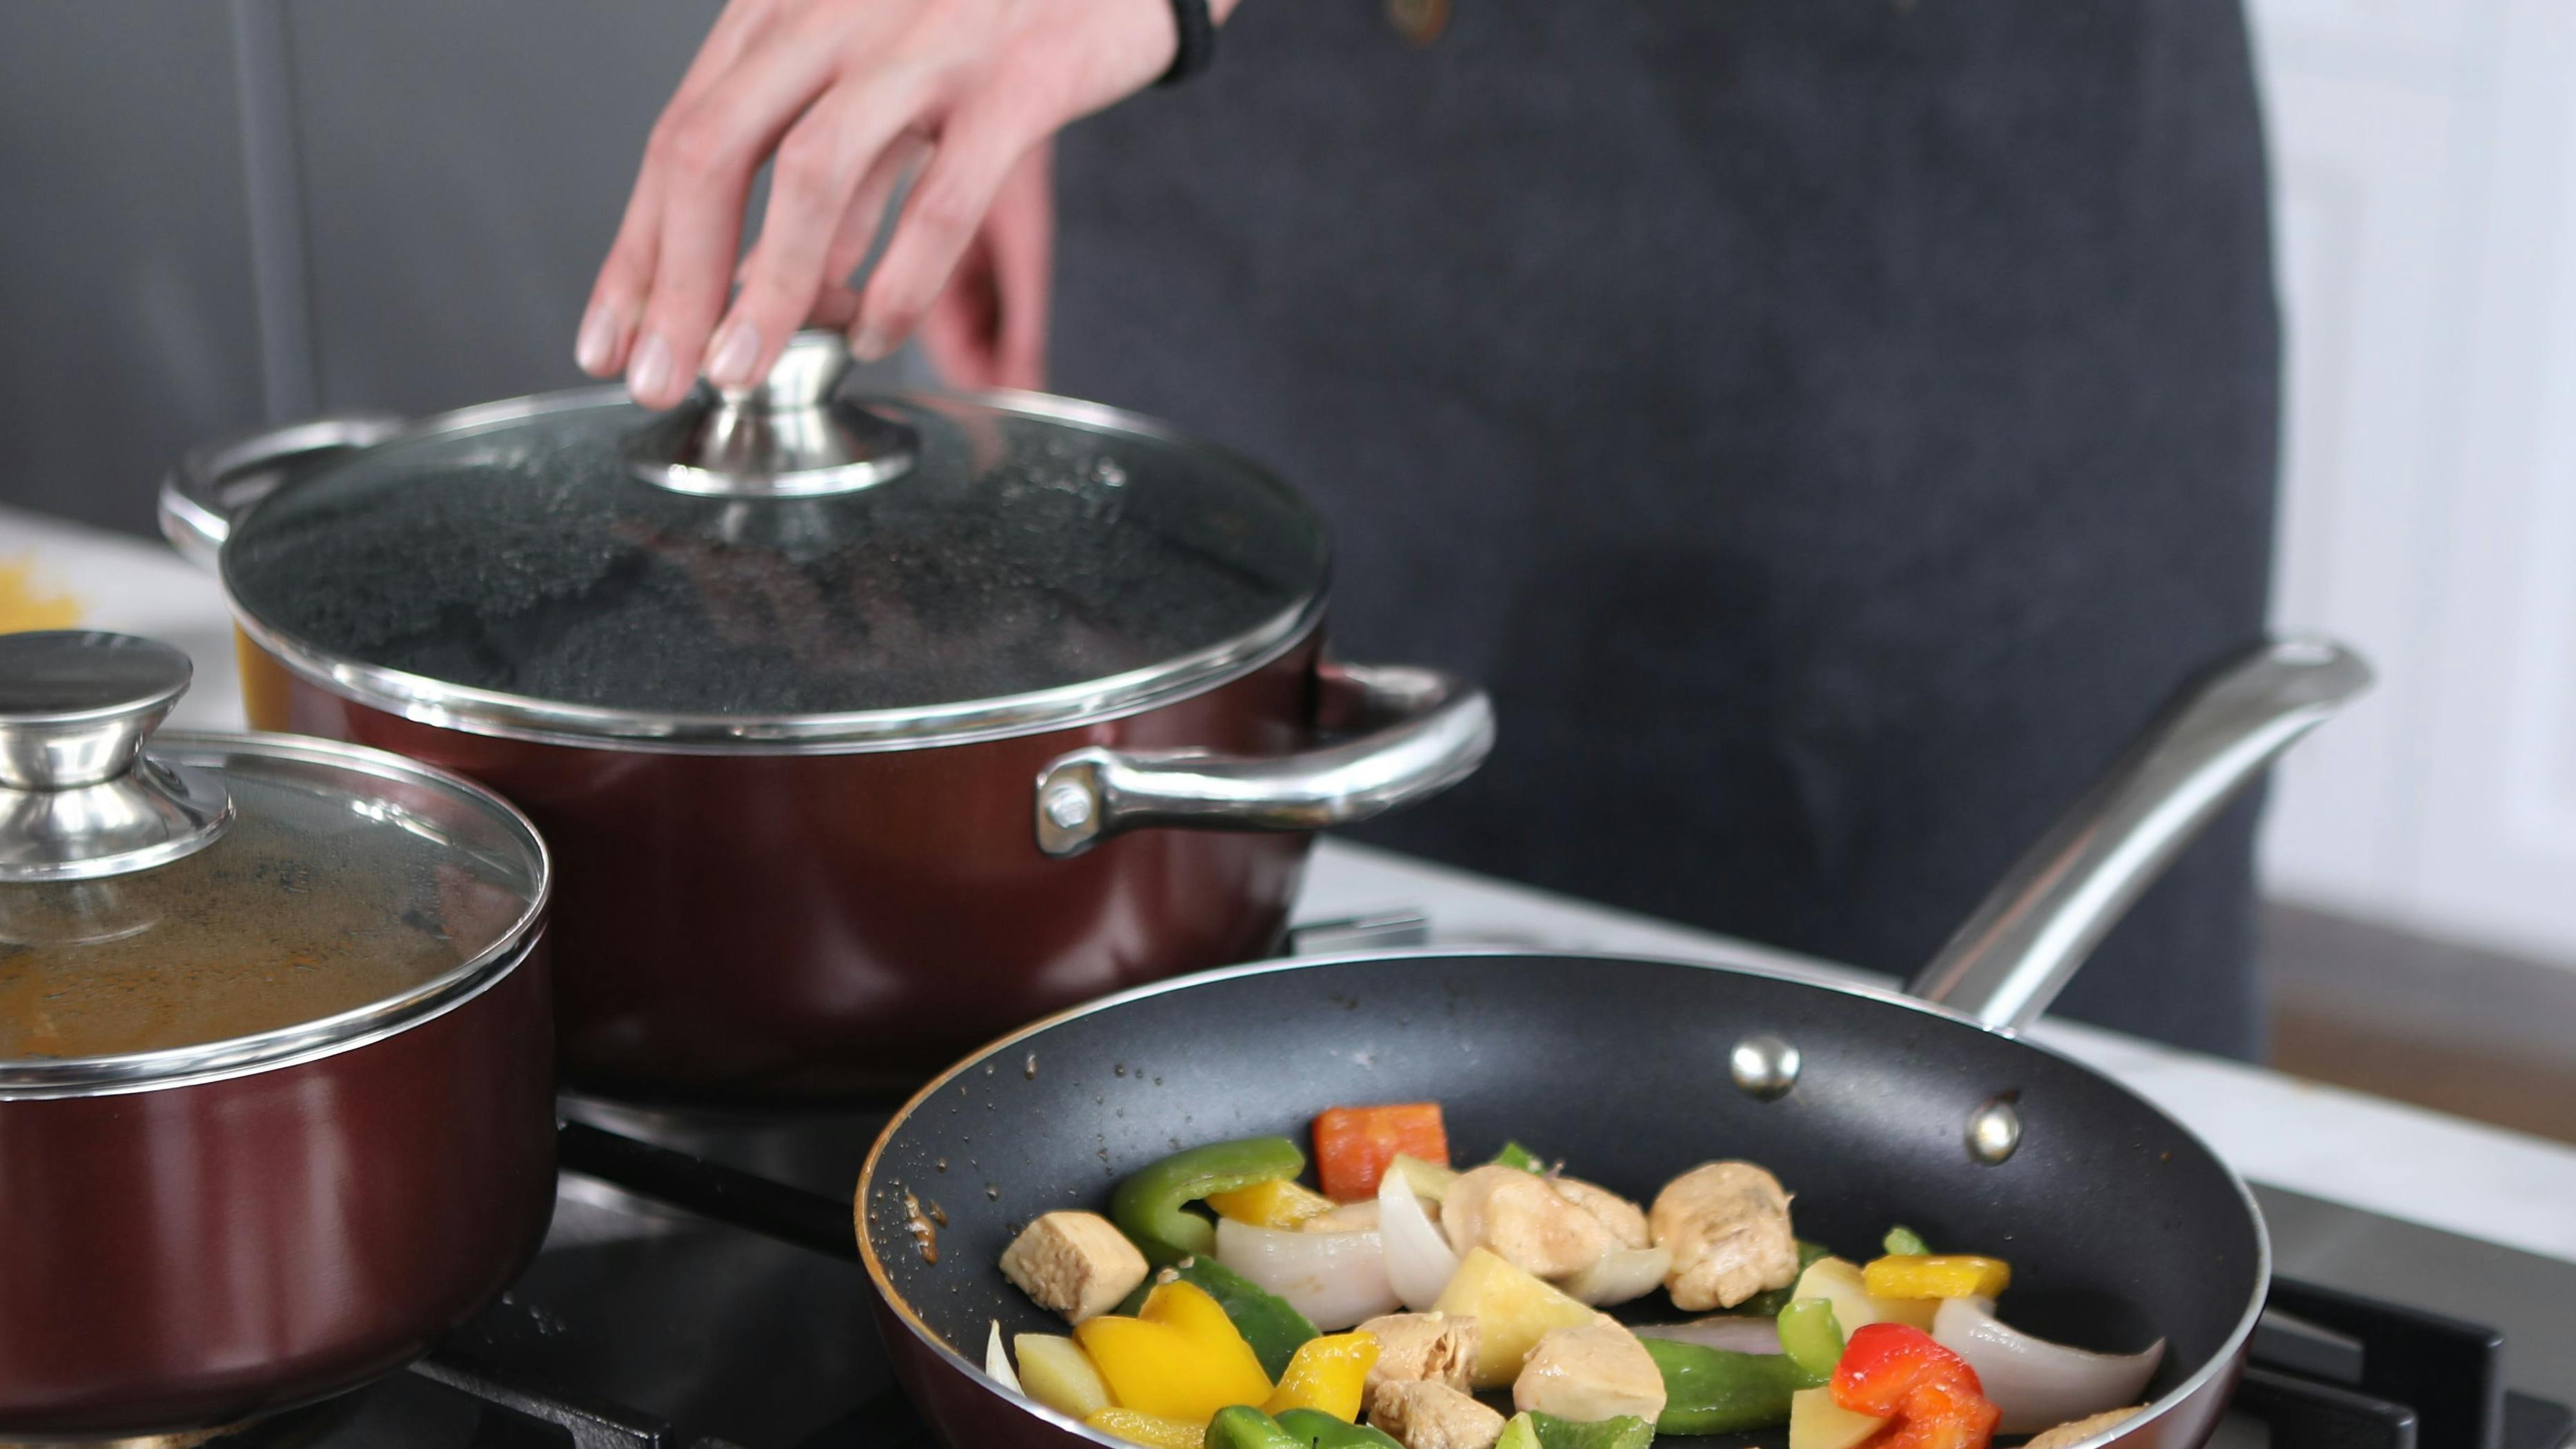 A person cooking some vegetables in a pan and some other foods in a pot over a stove.